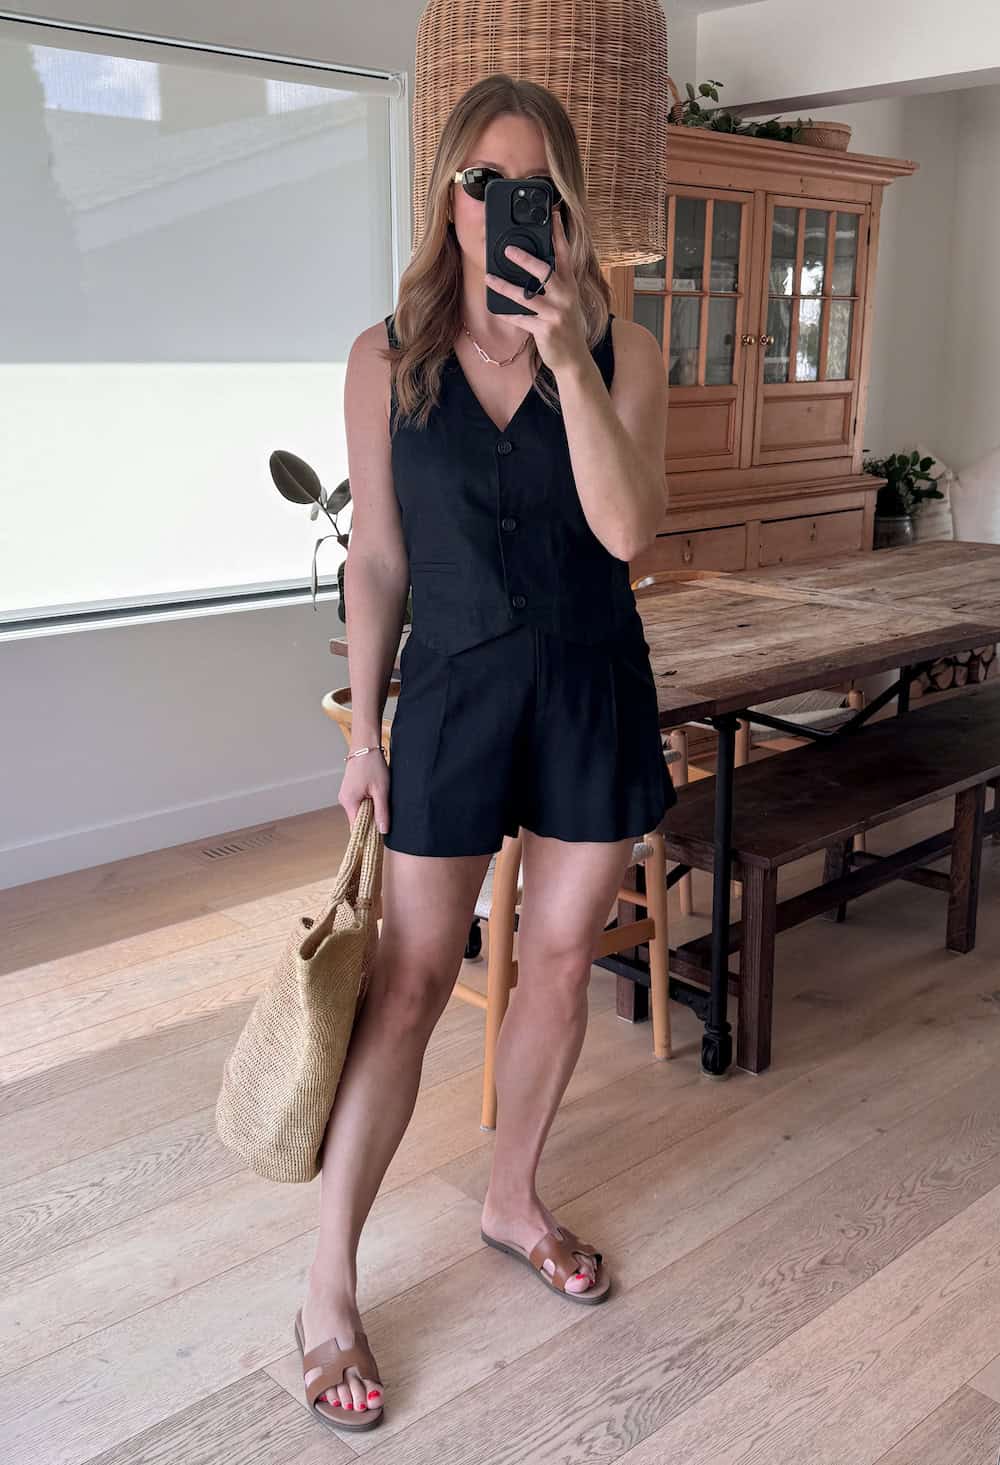 Christal wearing black shorts with a black vest top and brown sandals.